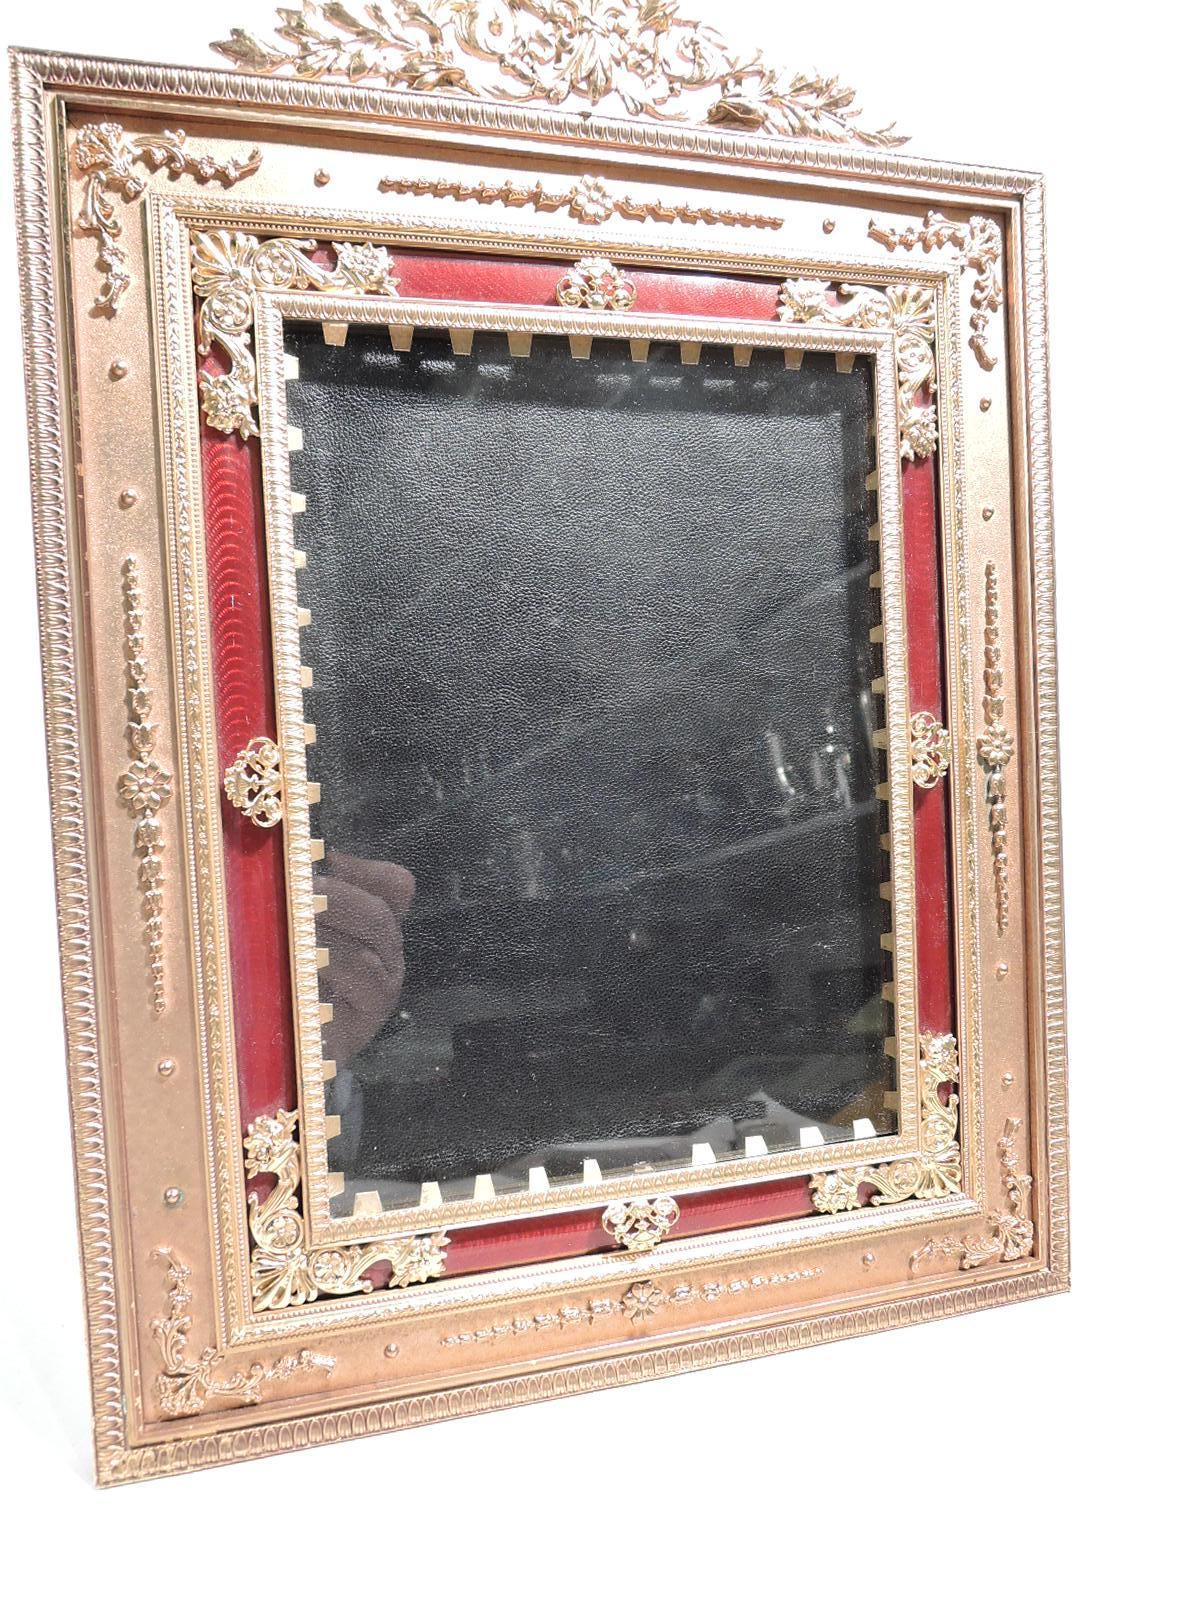 Turn-of-the-century French gilt bronze picture frame. Rectangular window in same surround with raised leaf-and-dart, imbricated leaf, and beaded borders. Red guilloche border and applied and pierced flower baskets, cornucopias, bouquets and shells.